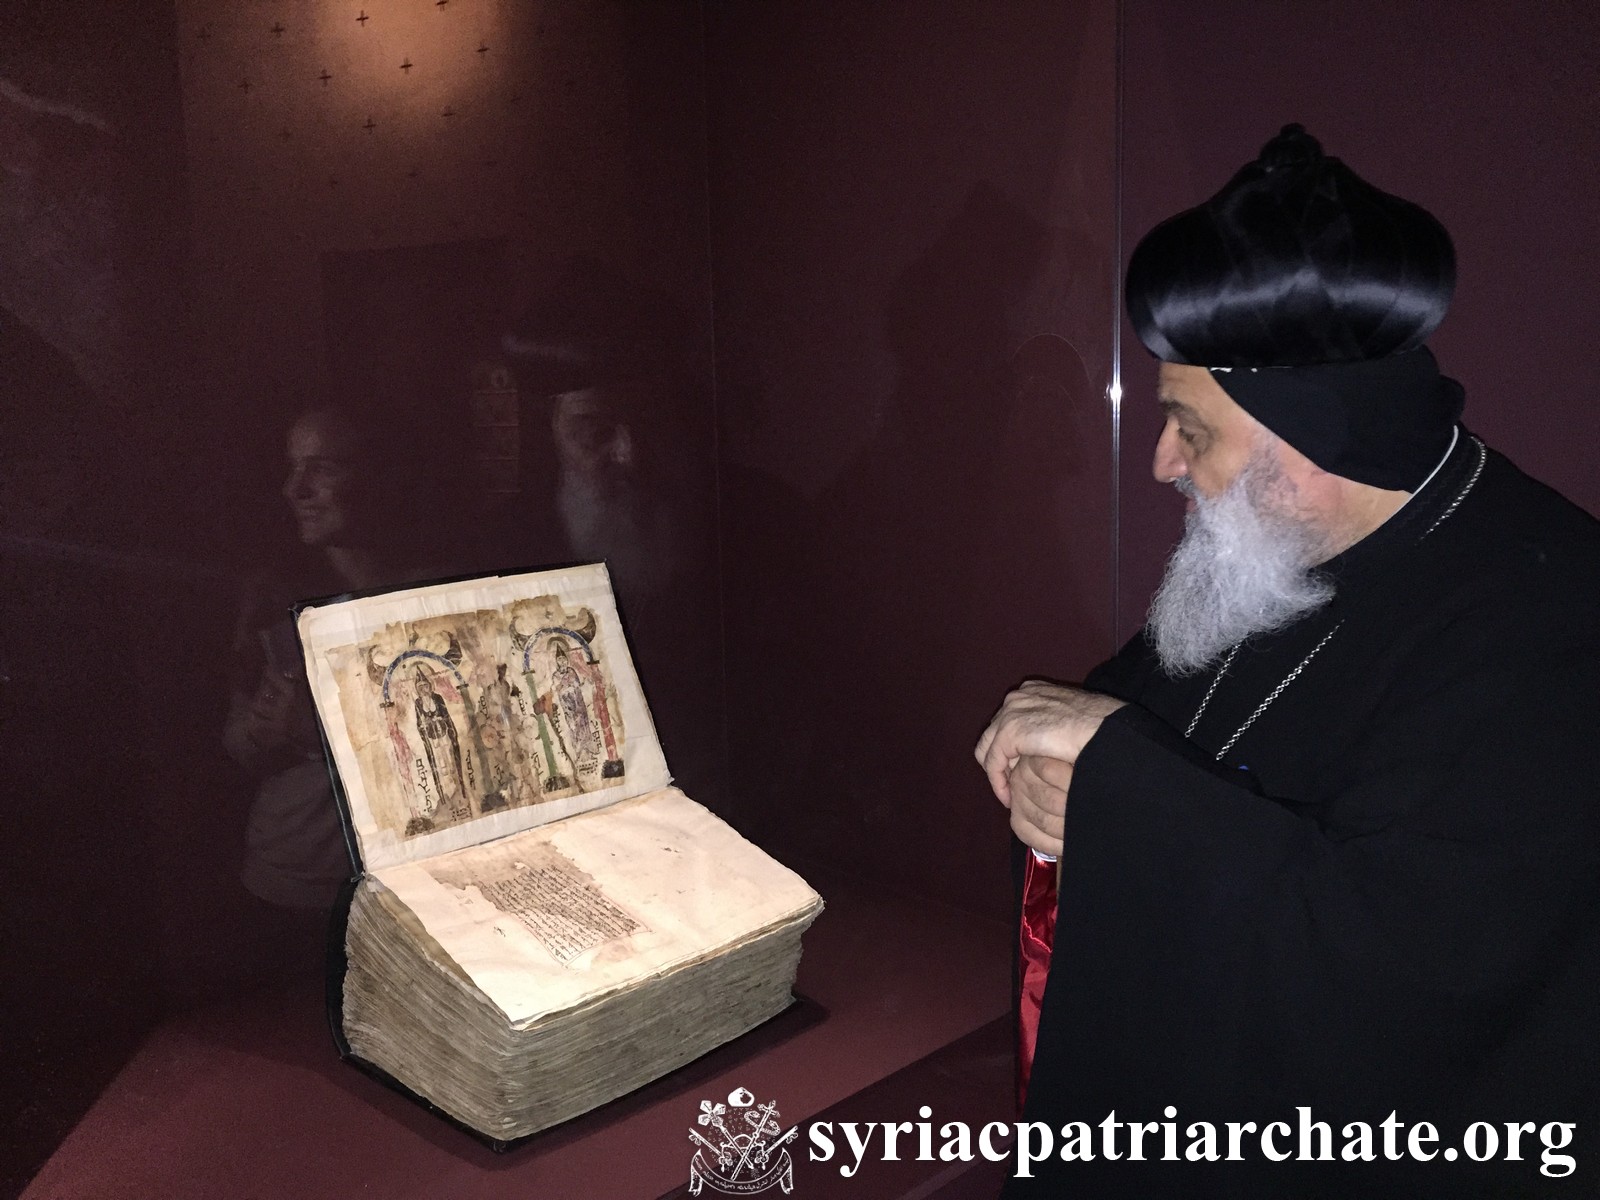 Exhibition: Christians of the Orient, 2000 Years of History